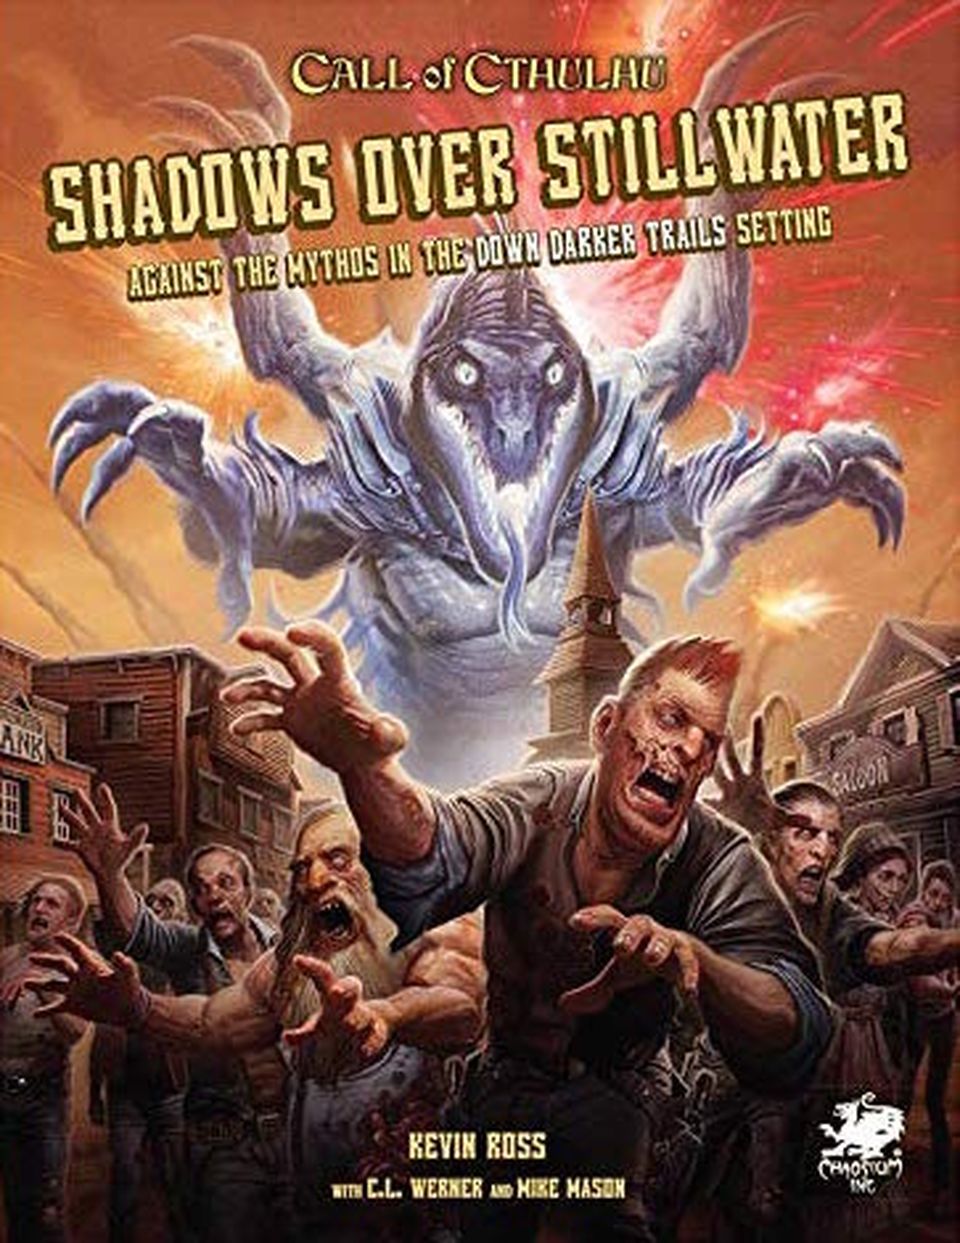 Call of Cthulhu: Shadows Over Stillwater- Against the Mythos in the Down Darker Trails VO image